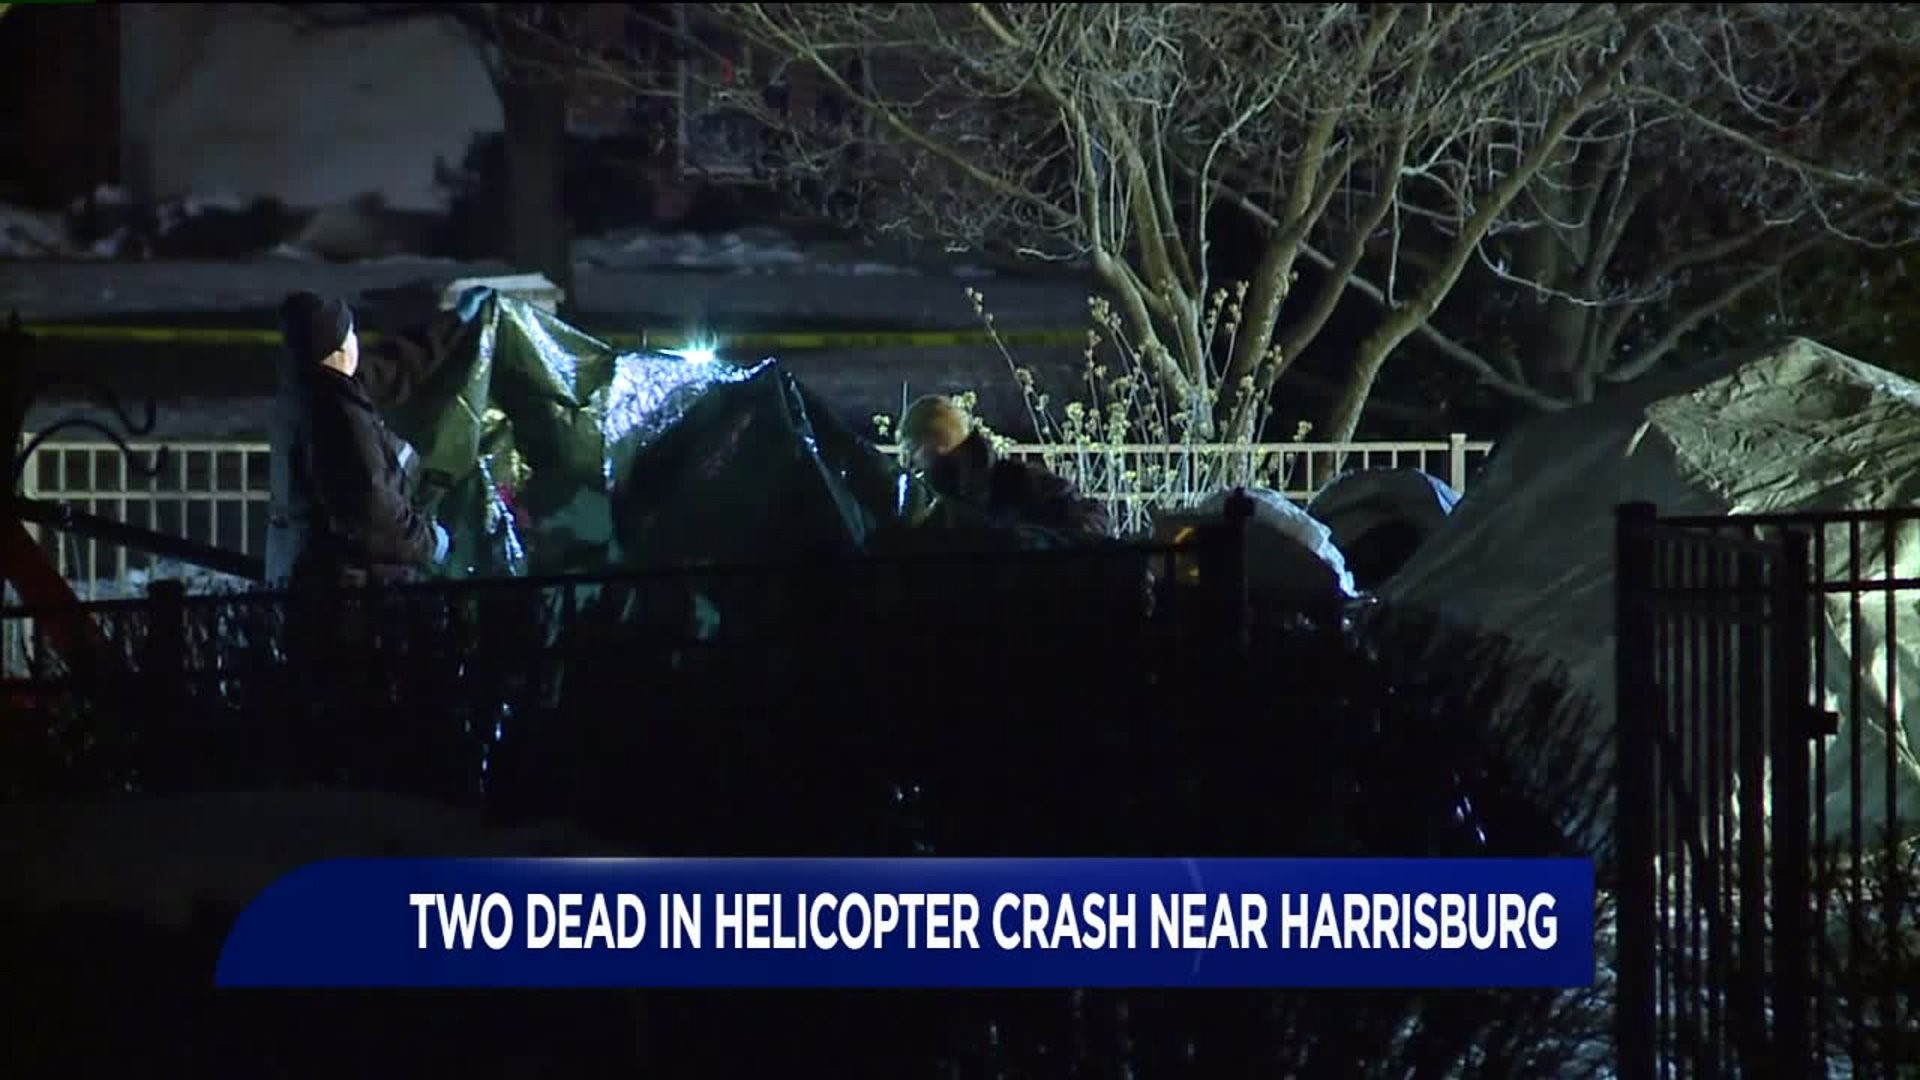 Two Men Killed in Helicopter Crash Near Harrisburg Identified